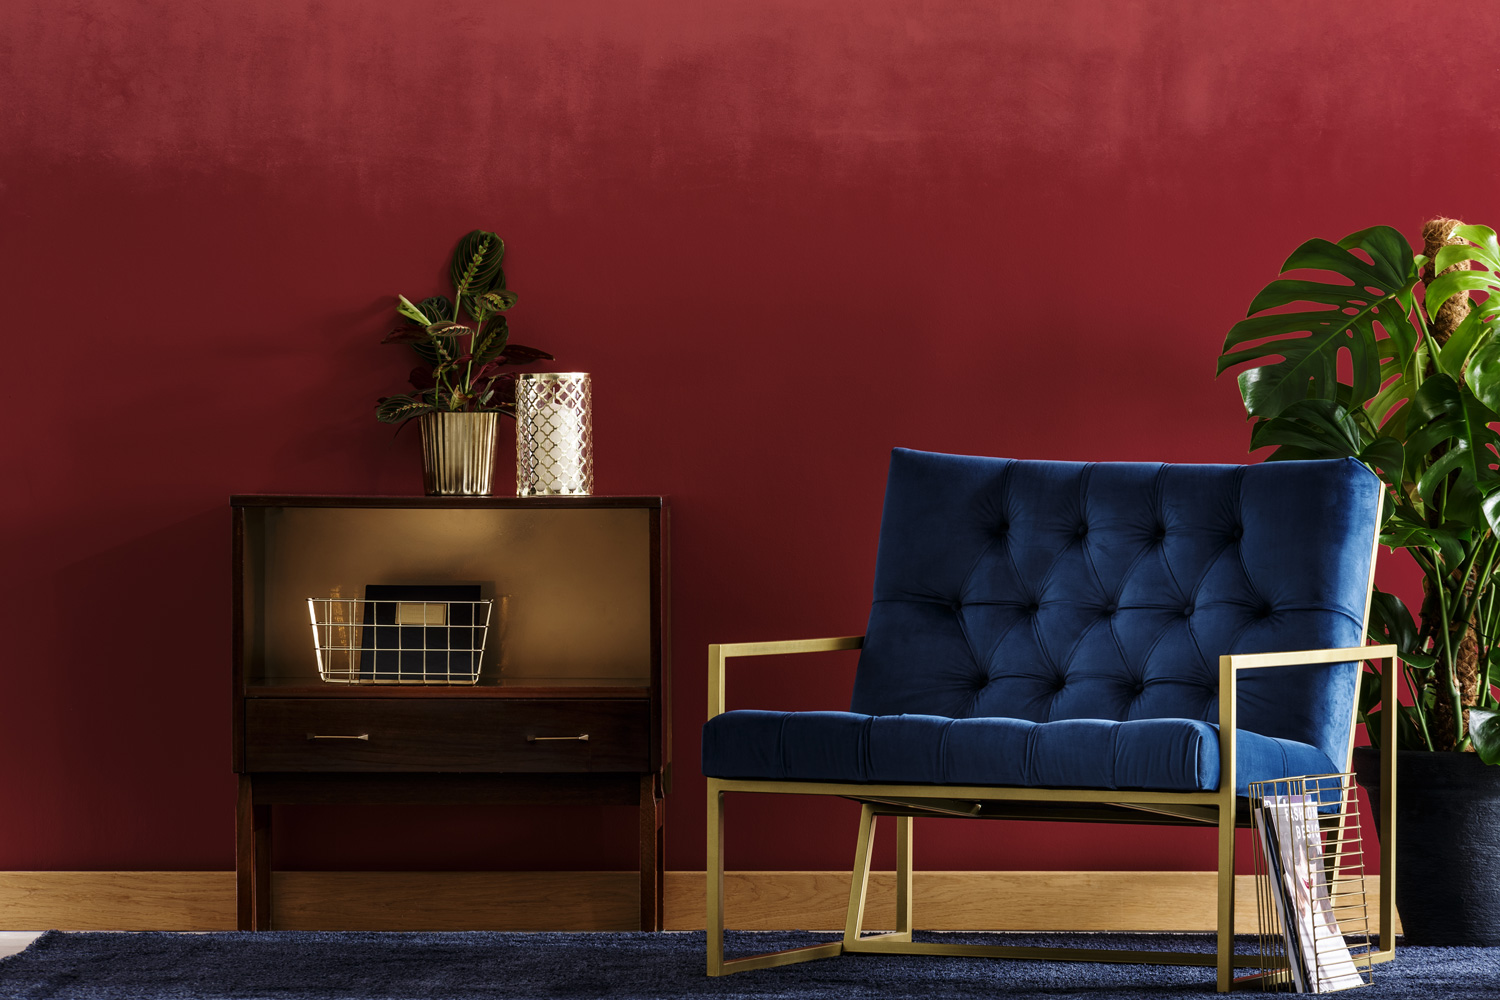 Small, wooden cupboard with a plant and navy blue armchair standing in living room interior with Monstera Deliciosa